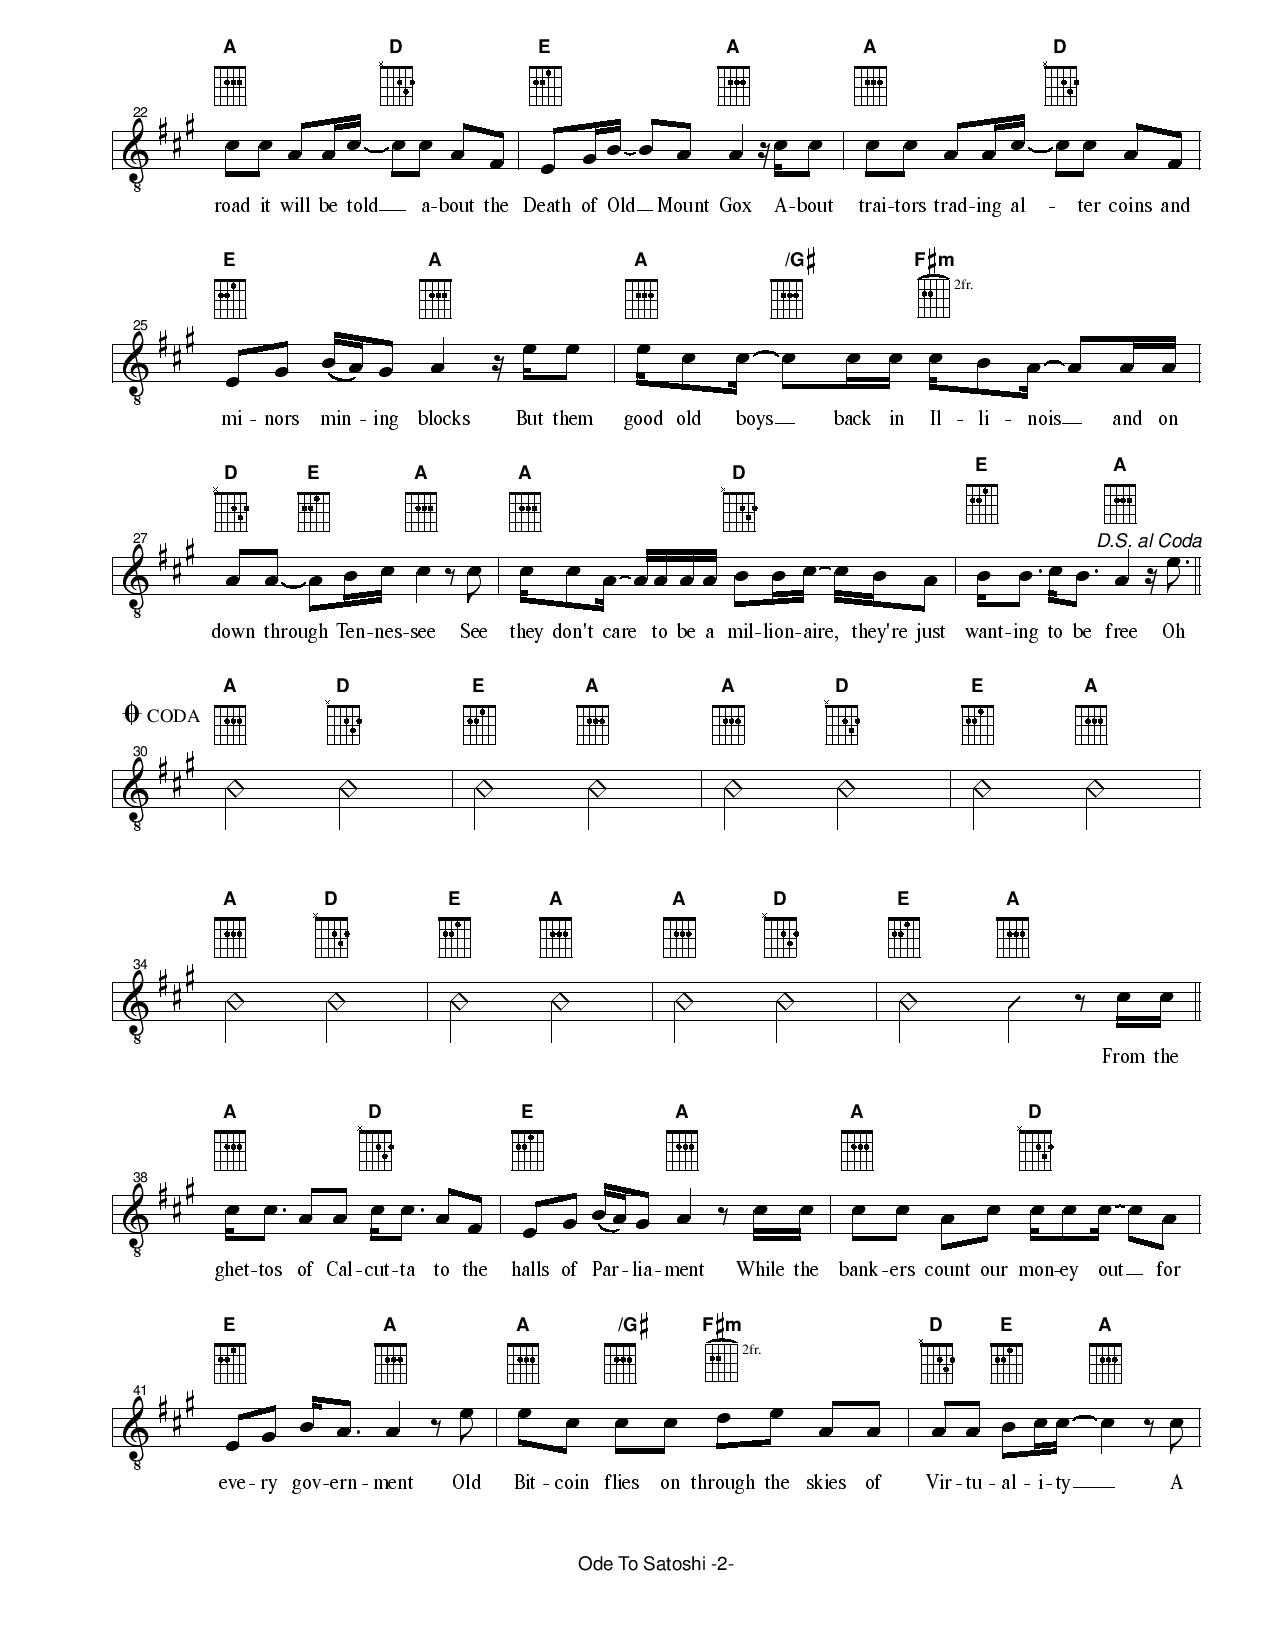 Ode Sheet Music in A-page-002.jpg